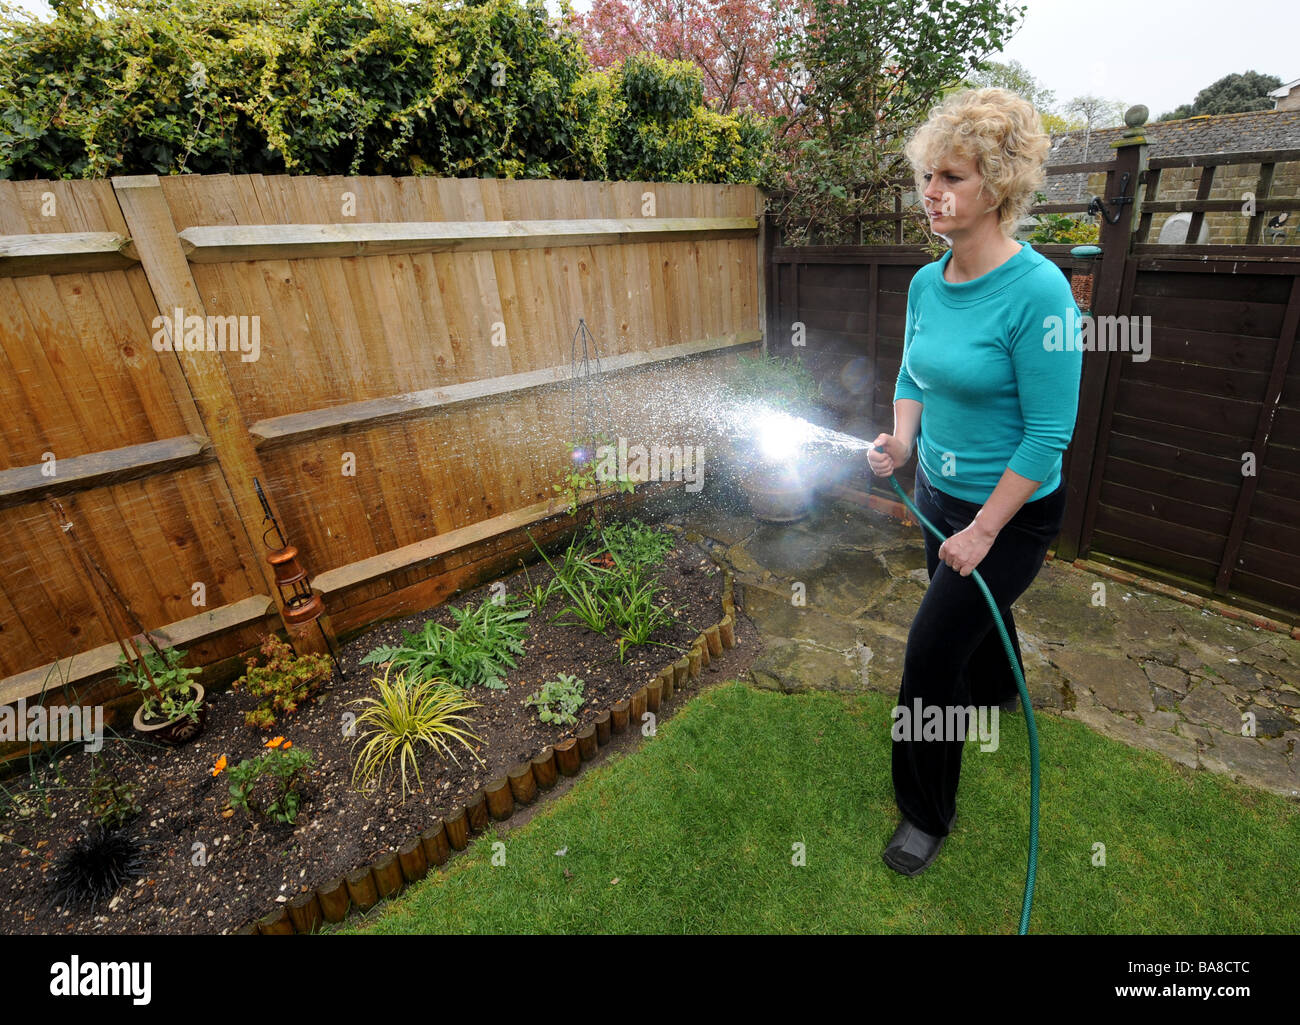 Blonde haired woman watering plants in her small town garden with garden light on Stock Photo